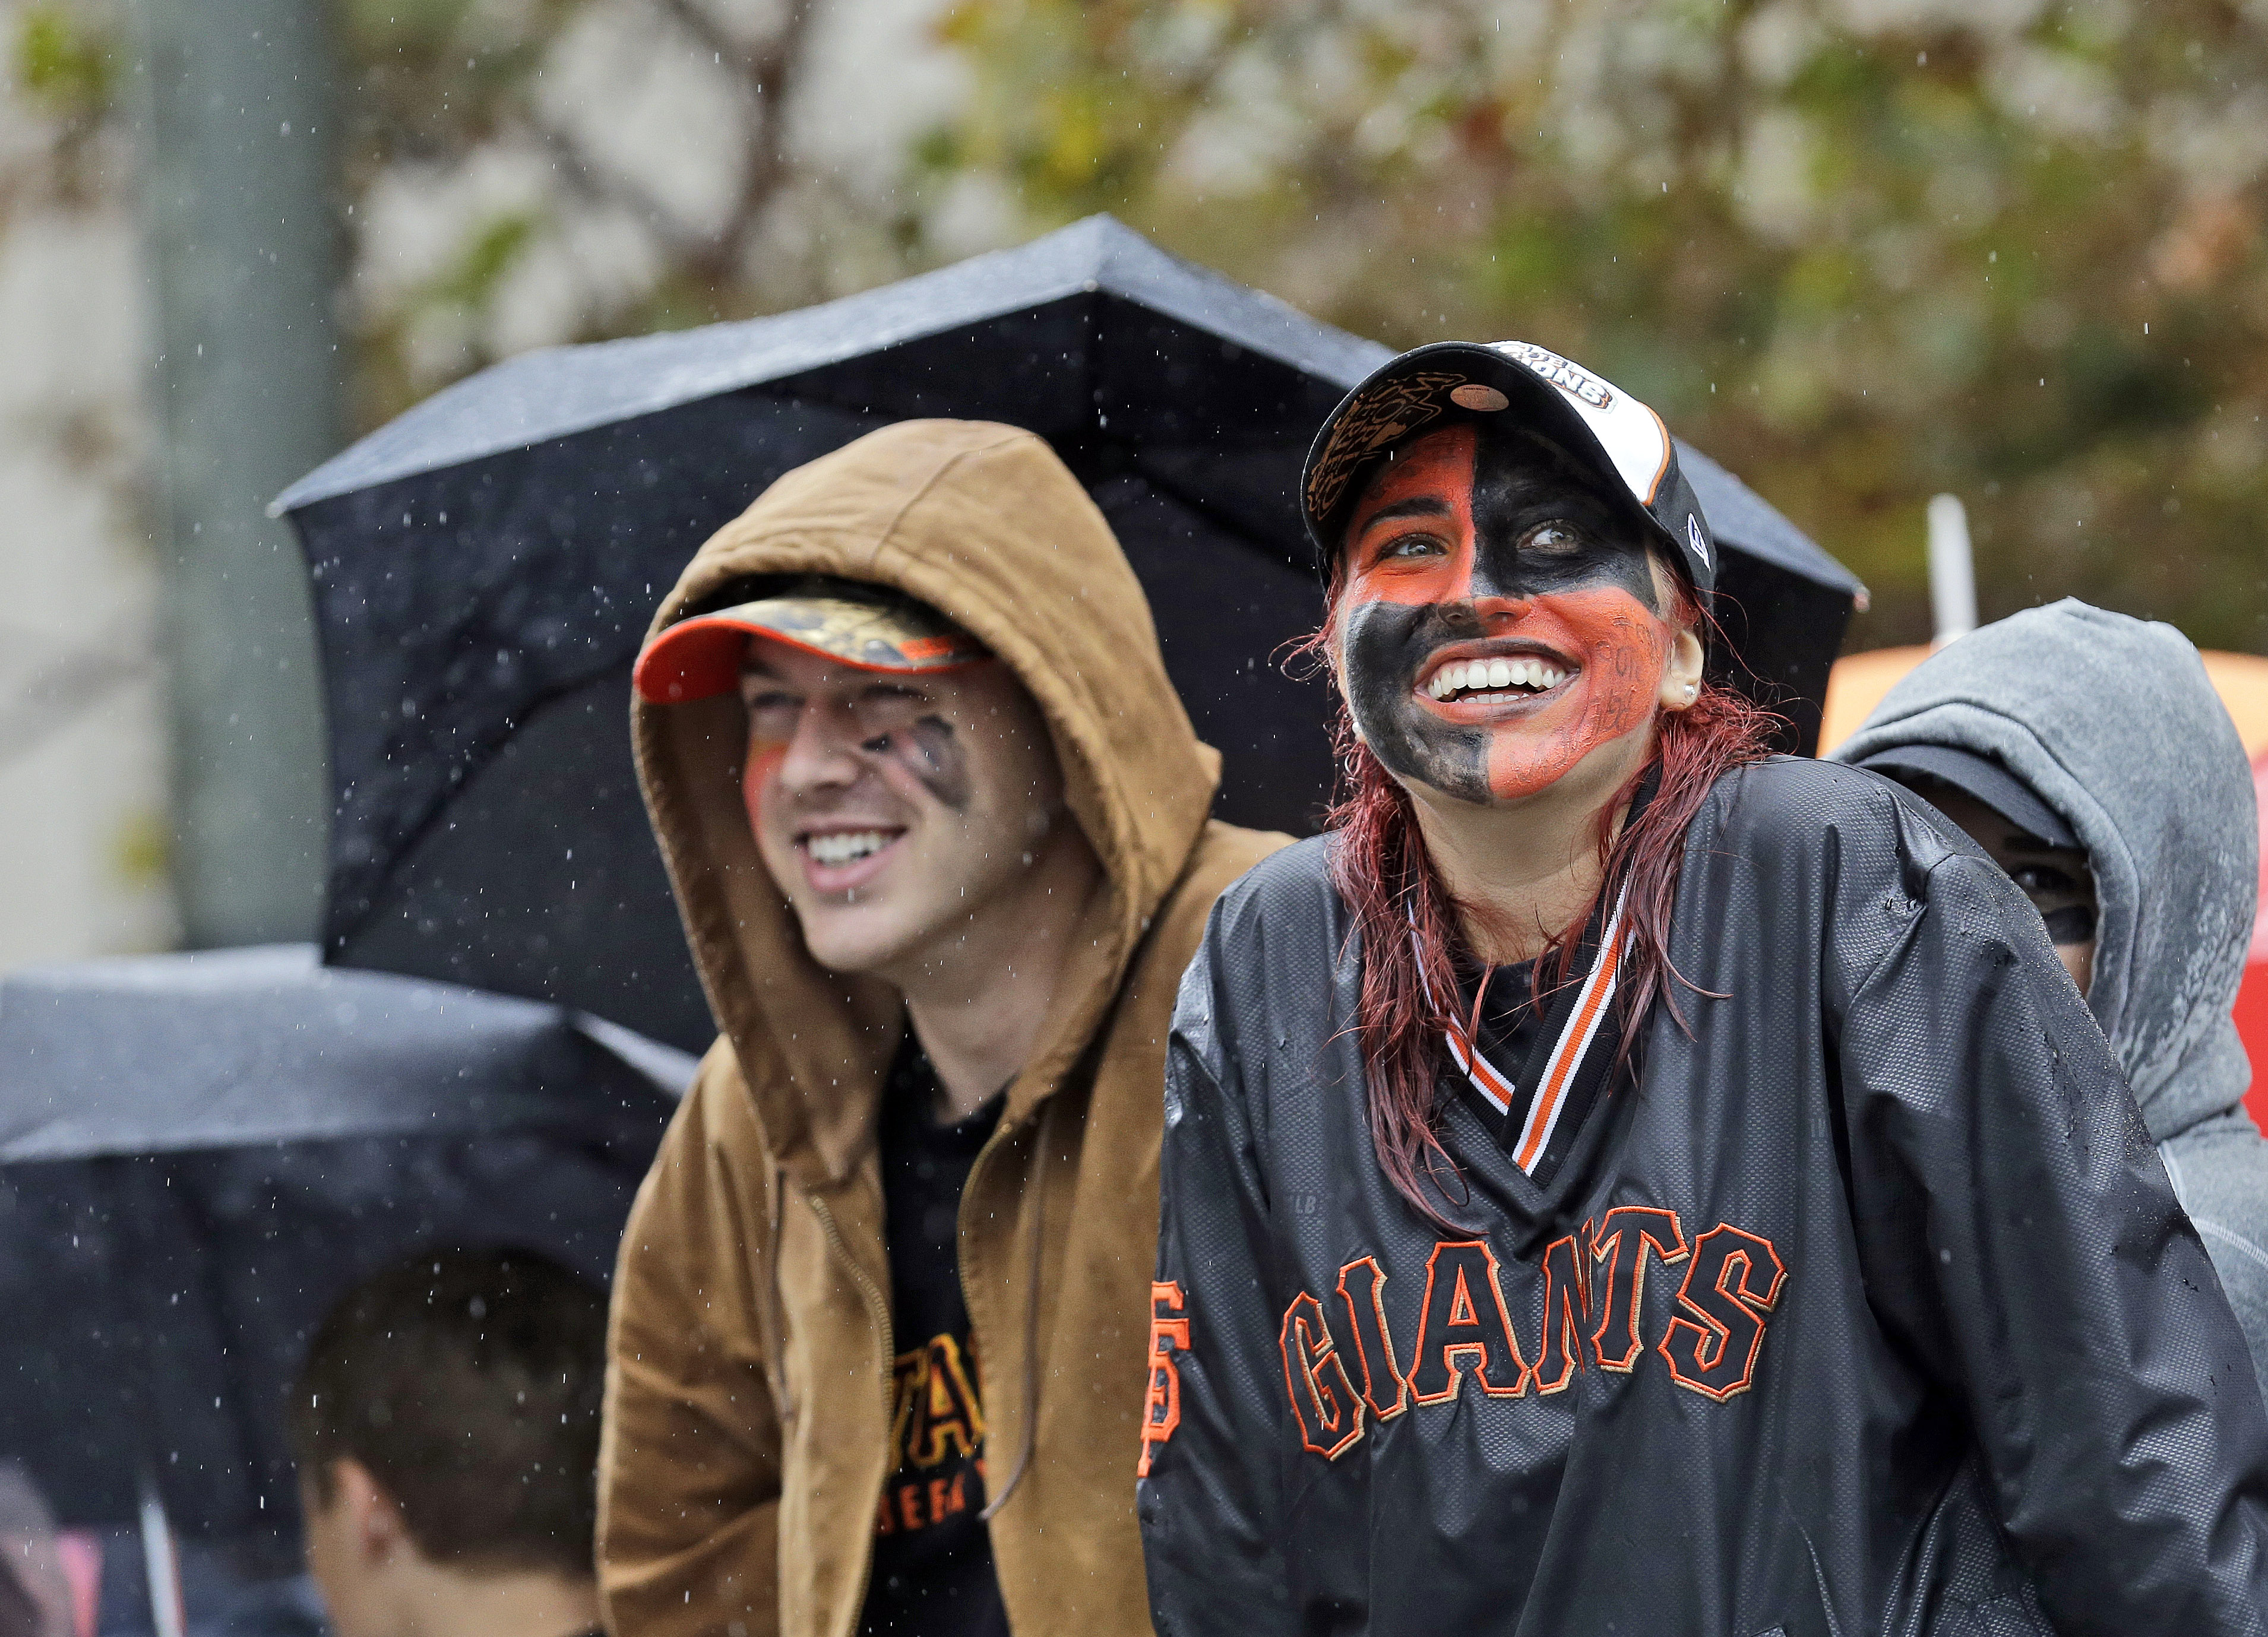 San Francisco Giants baseball fans Megan McPhillips, right, and Travis Saracco from Santa Rosa, Calif., wait in the rain for the start of the victory parade for the 2014 World Series Champion San Francisco Giants on Friday, Oct. 31, 2014 in San Francisco. (Jeff Chiu—AP)